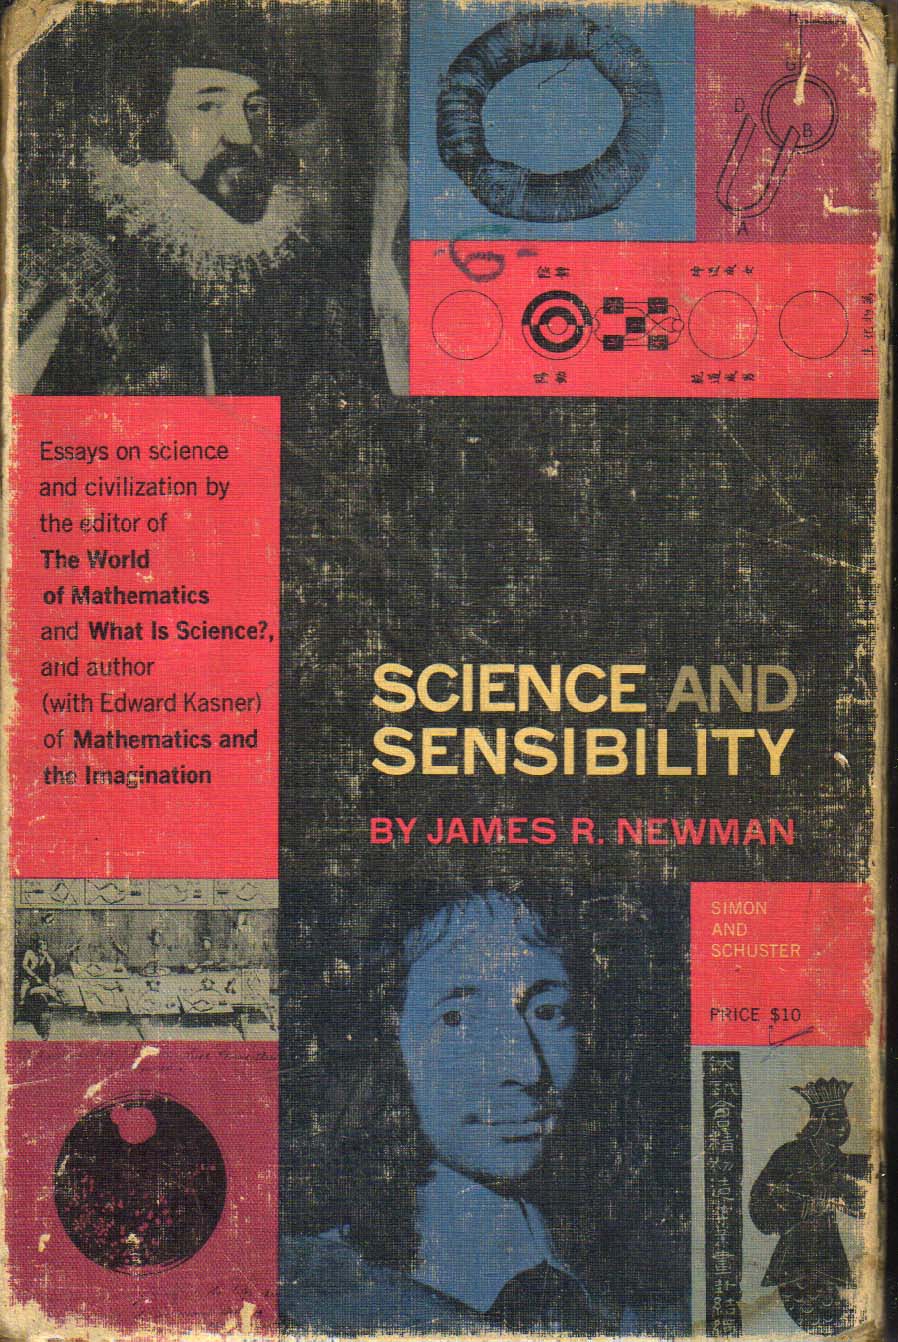 Science and sensibility [complete set of 2 volume]